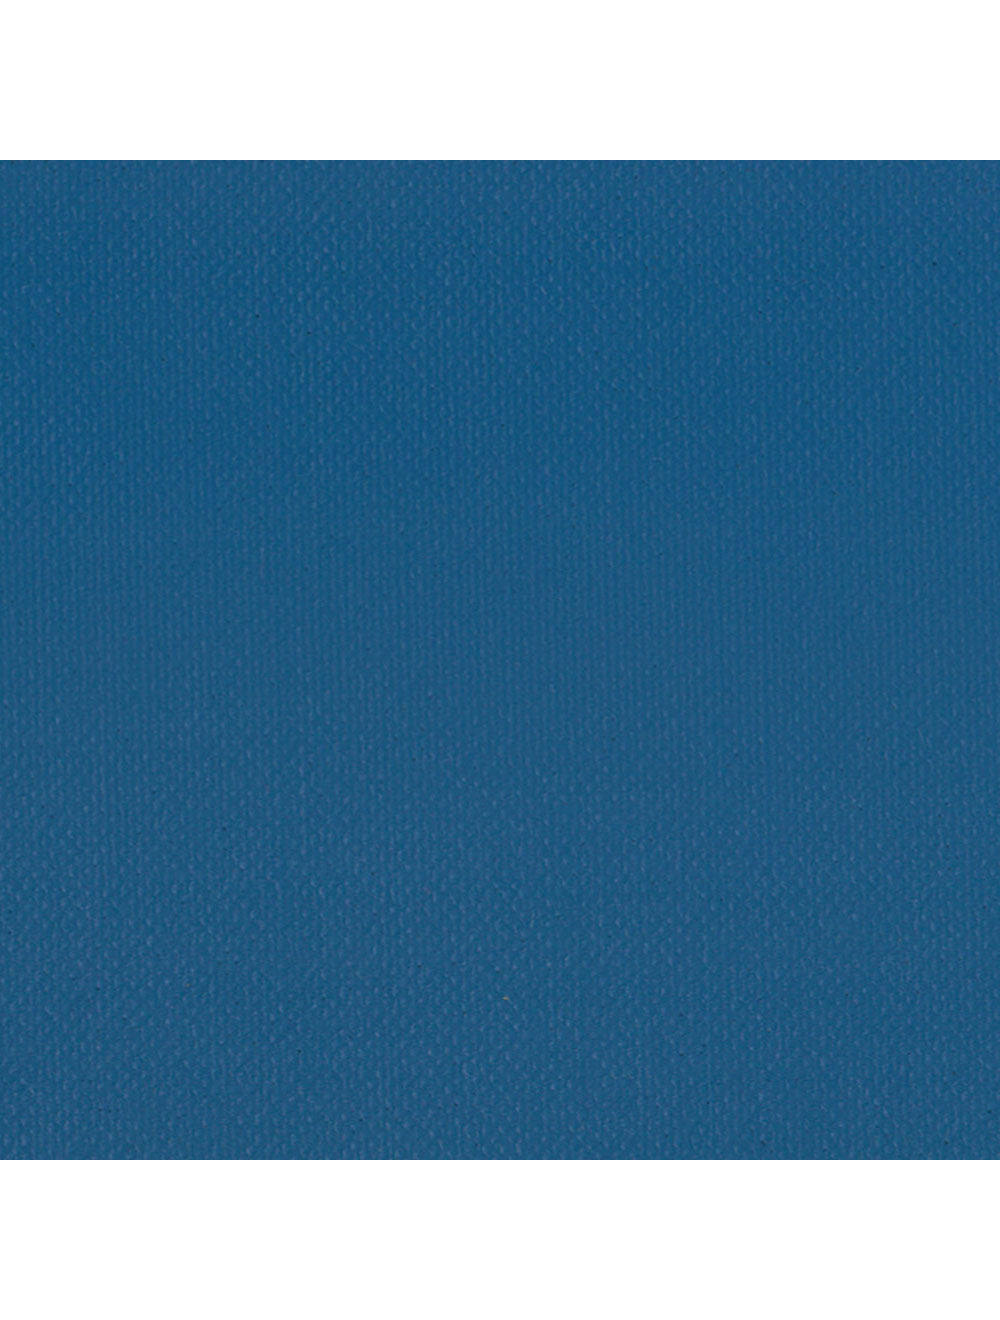 London Azure Material Swatch Material Swatch